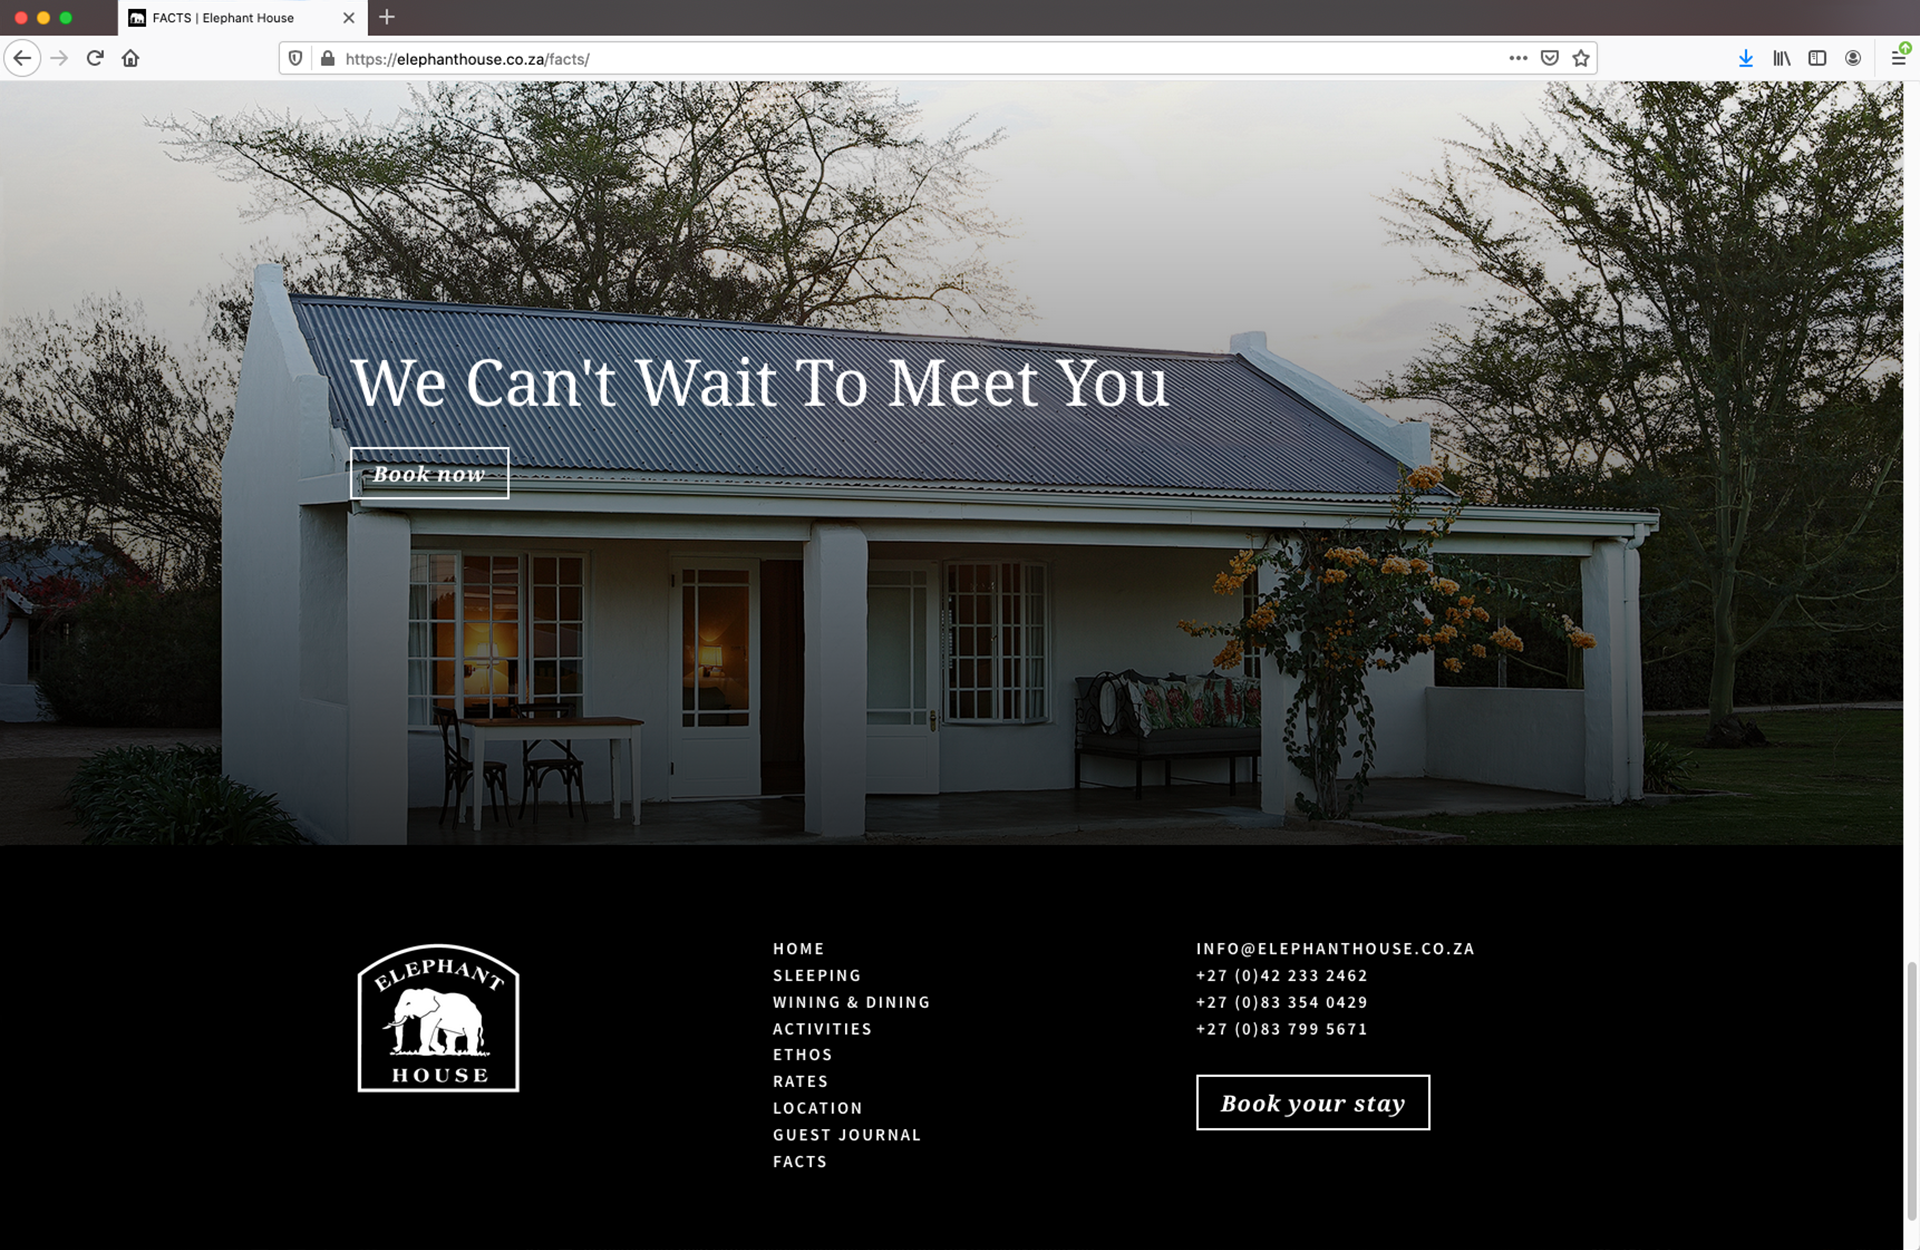 A typical Elephant House website page